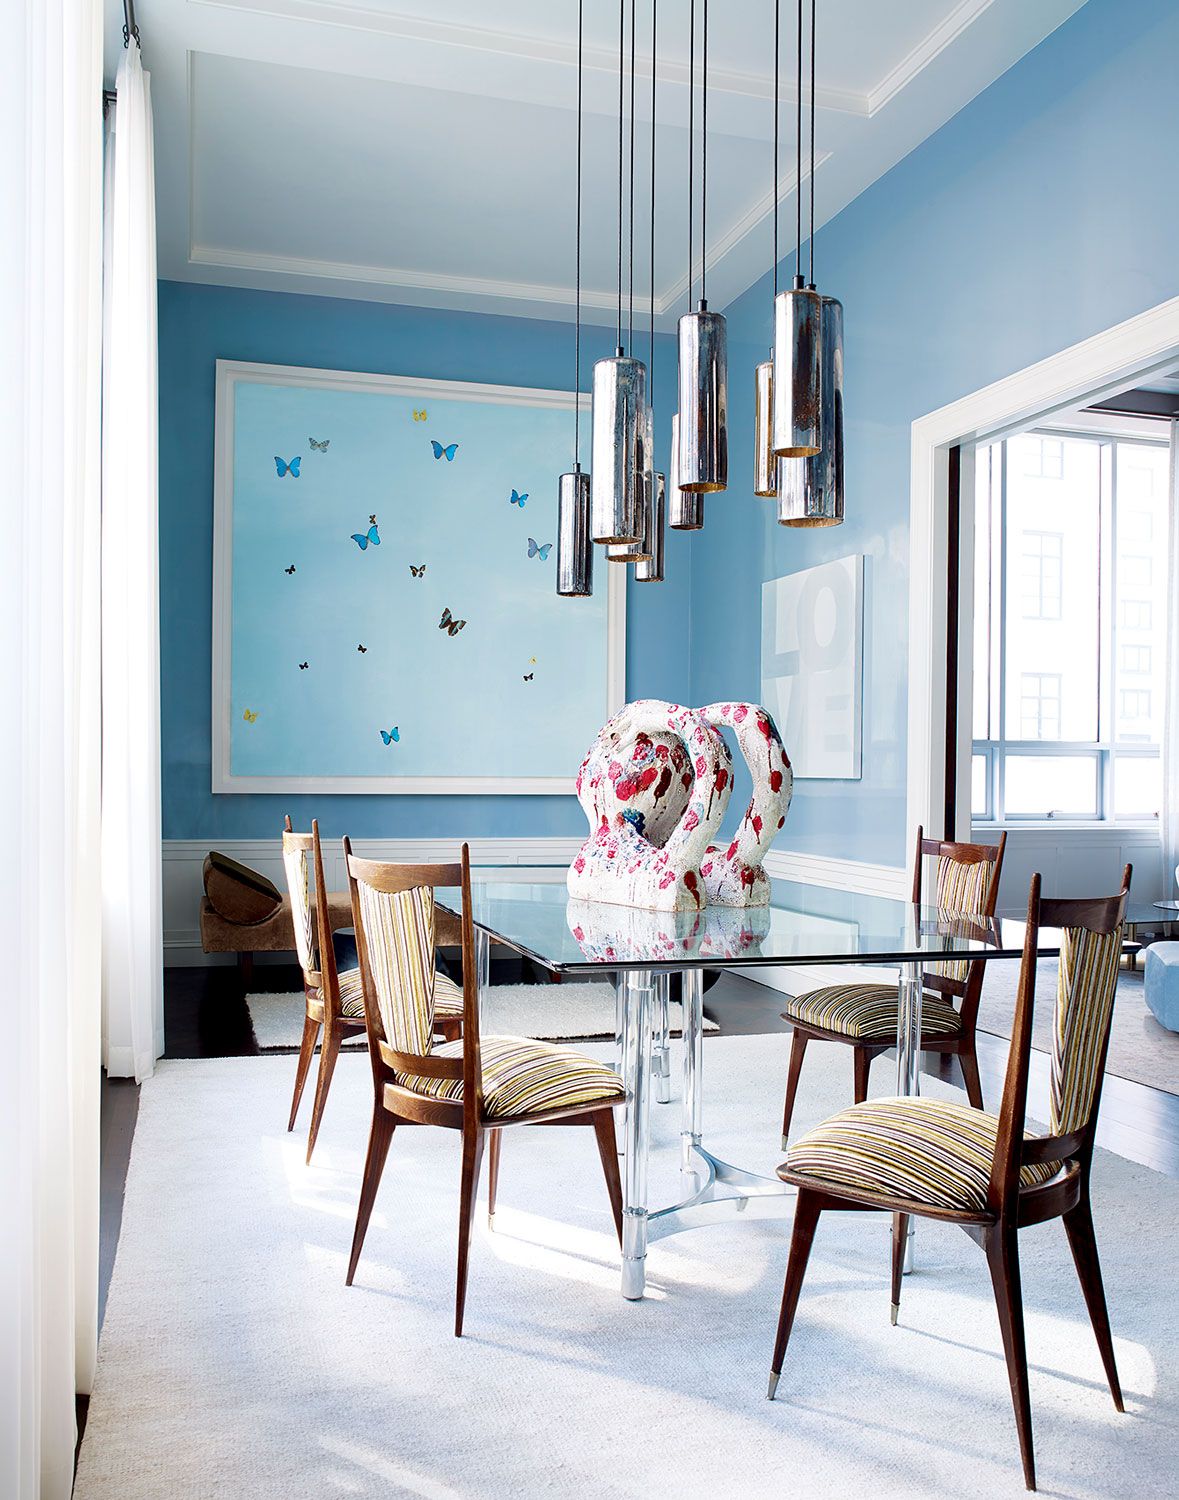 Italian chairs from the 1960s surround the vintage dining table, and the vintage mercury-glass canister pendants are by Gregory Rogan; the sculpture is by William J. O’Brien; a butterfly painting by Damien Hirst hangs above a Kevin Walz daybed by Ralph Pucci.